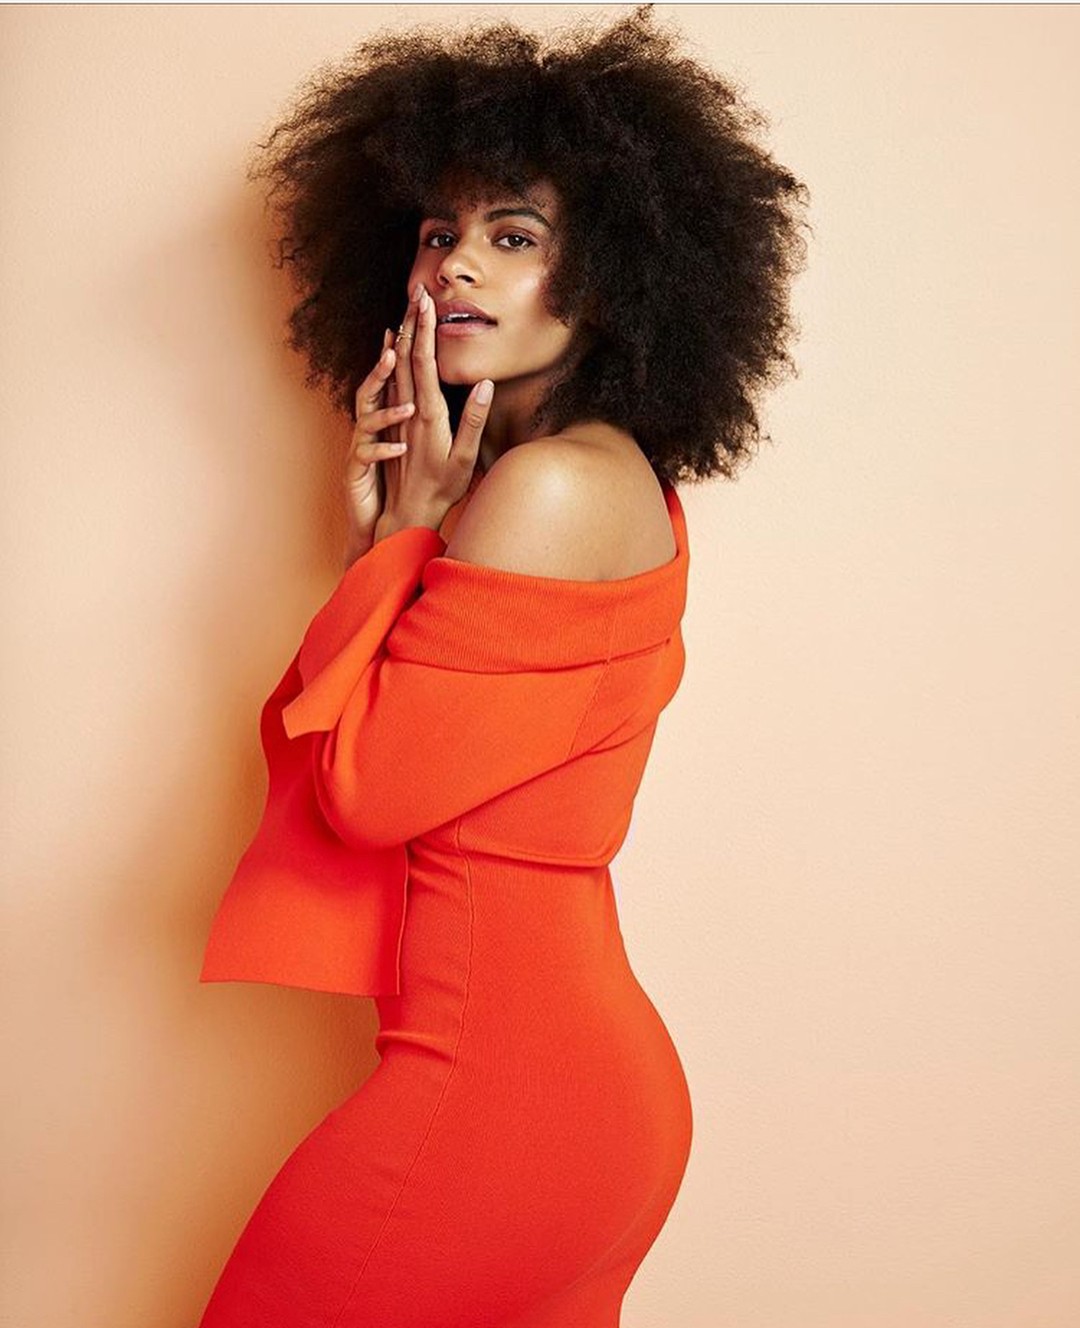 60+ Sexy Zazie Beetz Boobs Pictures Are Absolutely Mouth-Watering 34